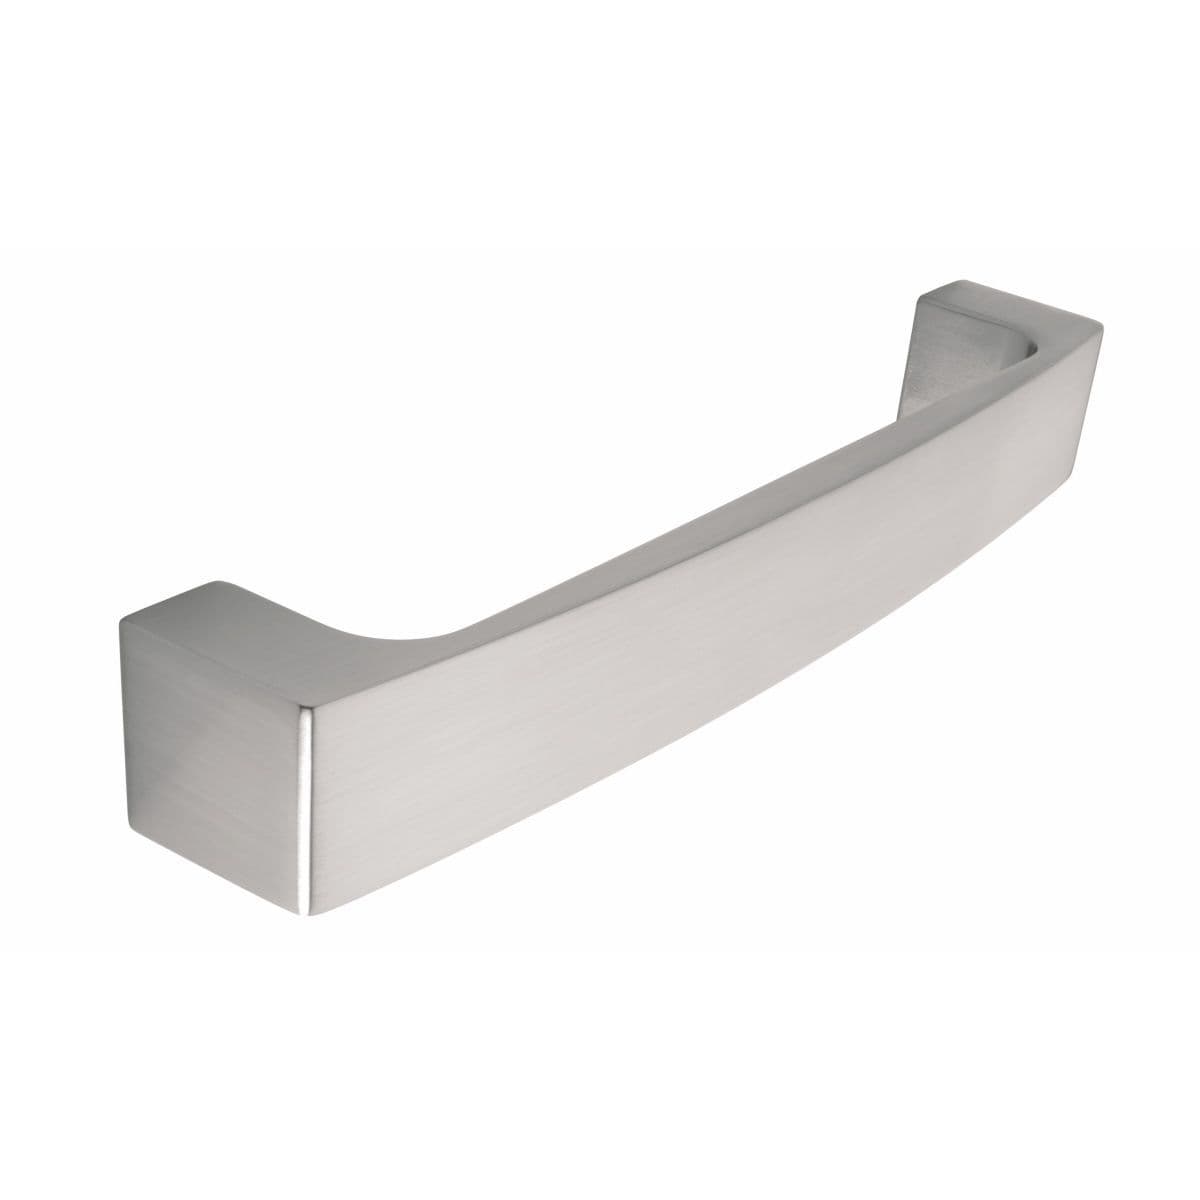 CRAY D Cupboard Handle - 2 sizes - BRUSHED STAINLESS STEEL EFFECT finish (PWS H582/H596.SS)